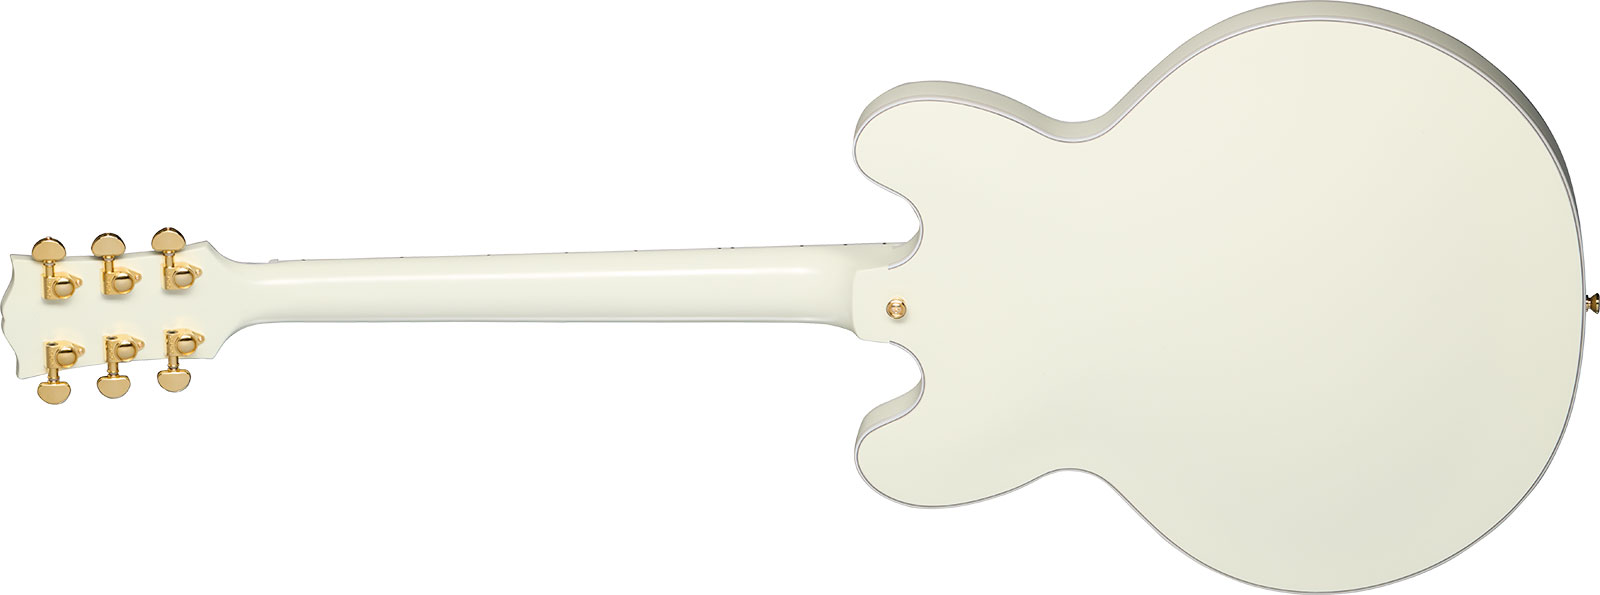 Epiphone Es355 1959 Inspired By 2h Gibson Ht Eb - Vos Classic White - Semi-hollow electric guitar - Variation 1